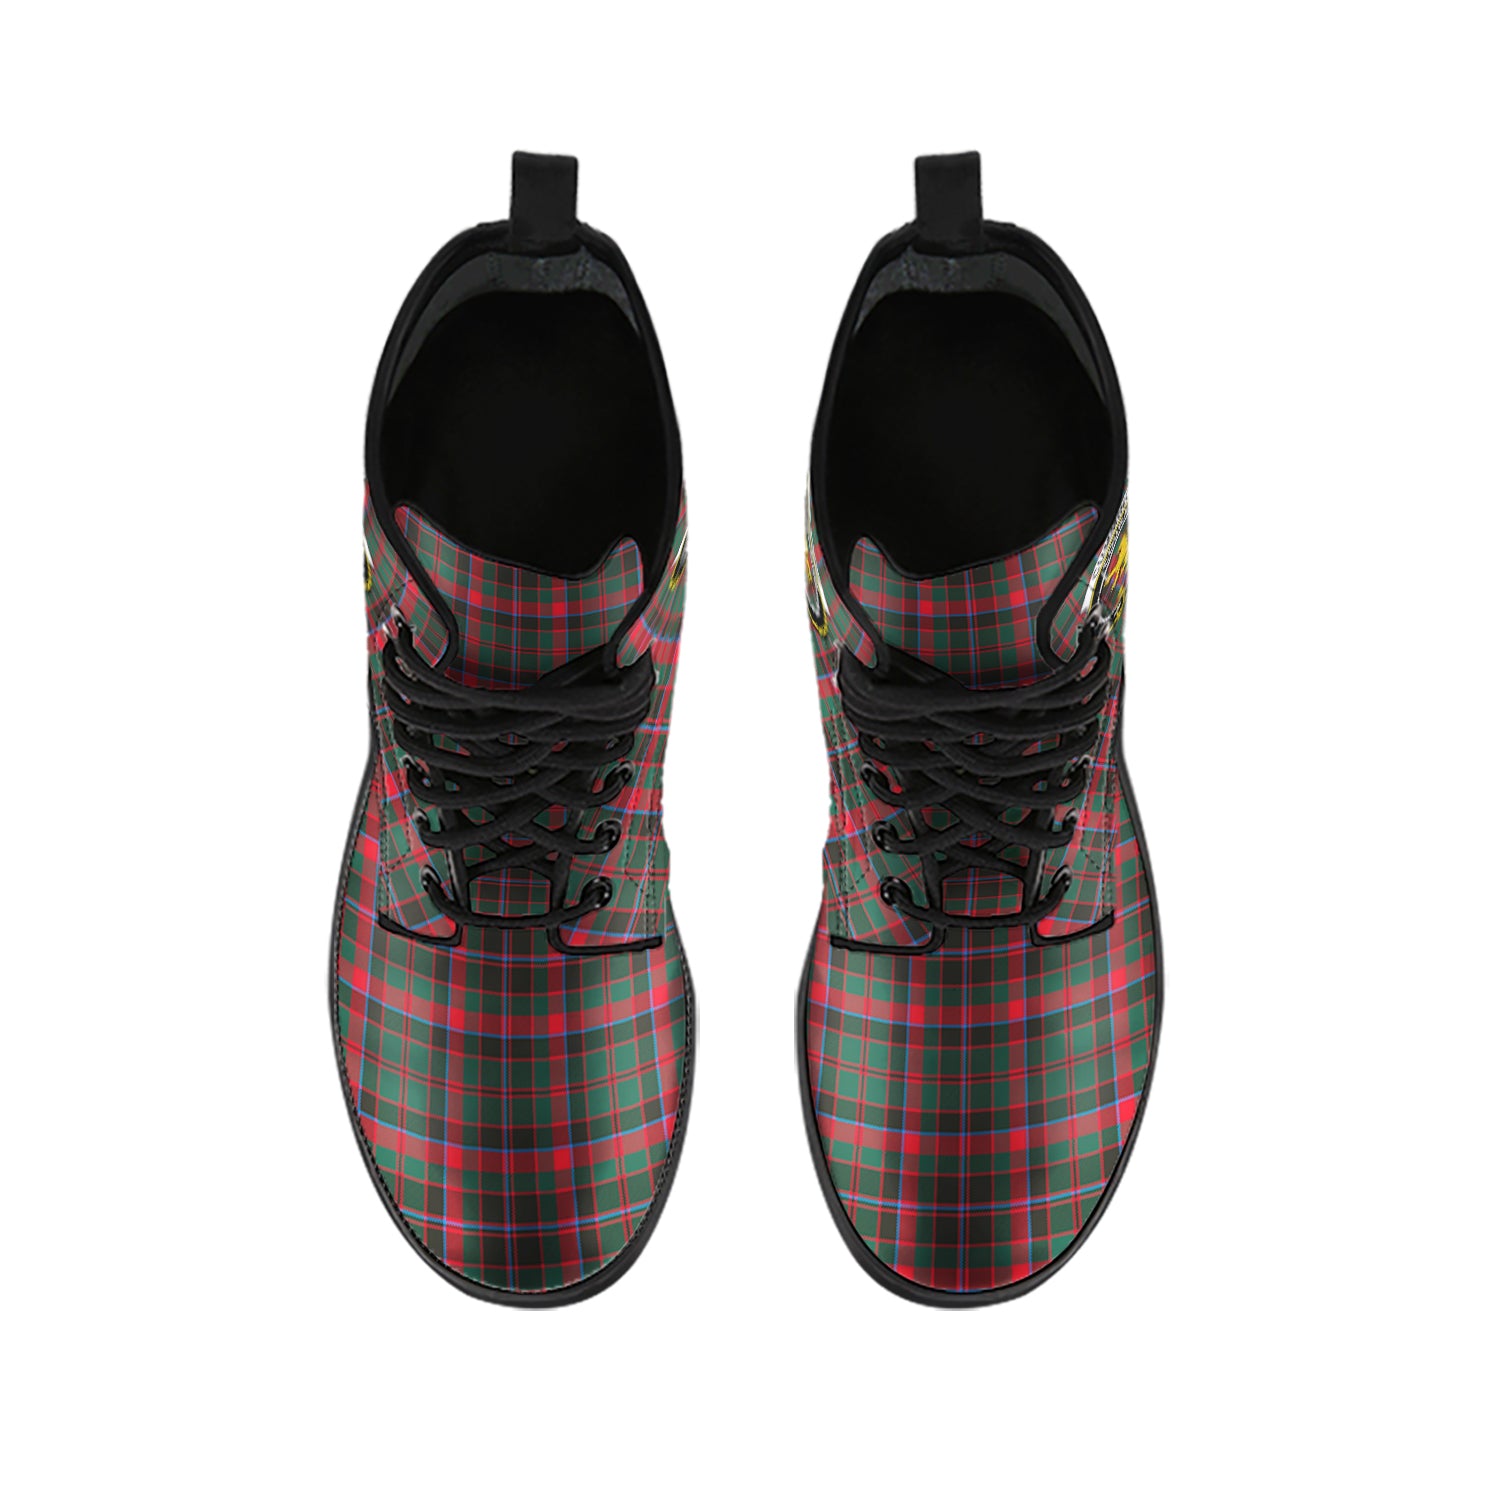 cumming-hunting-modern-tartan-leather-boots-with-family-crest